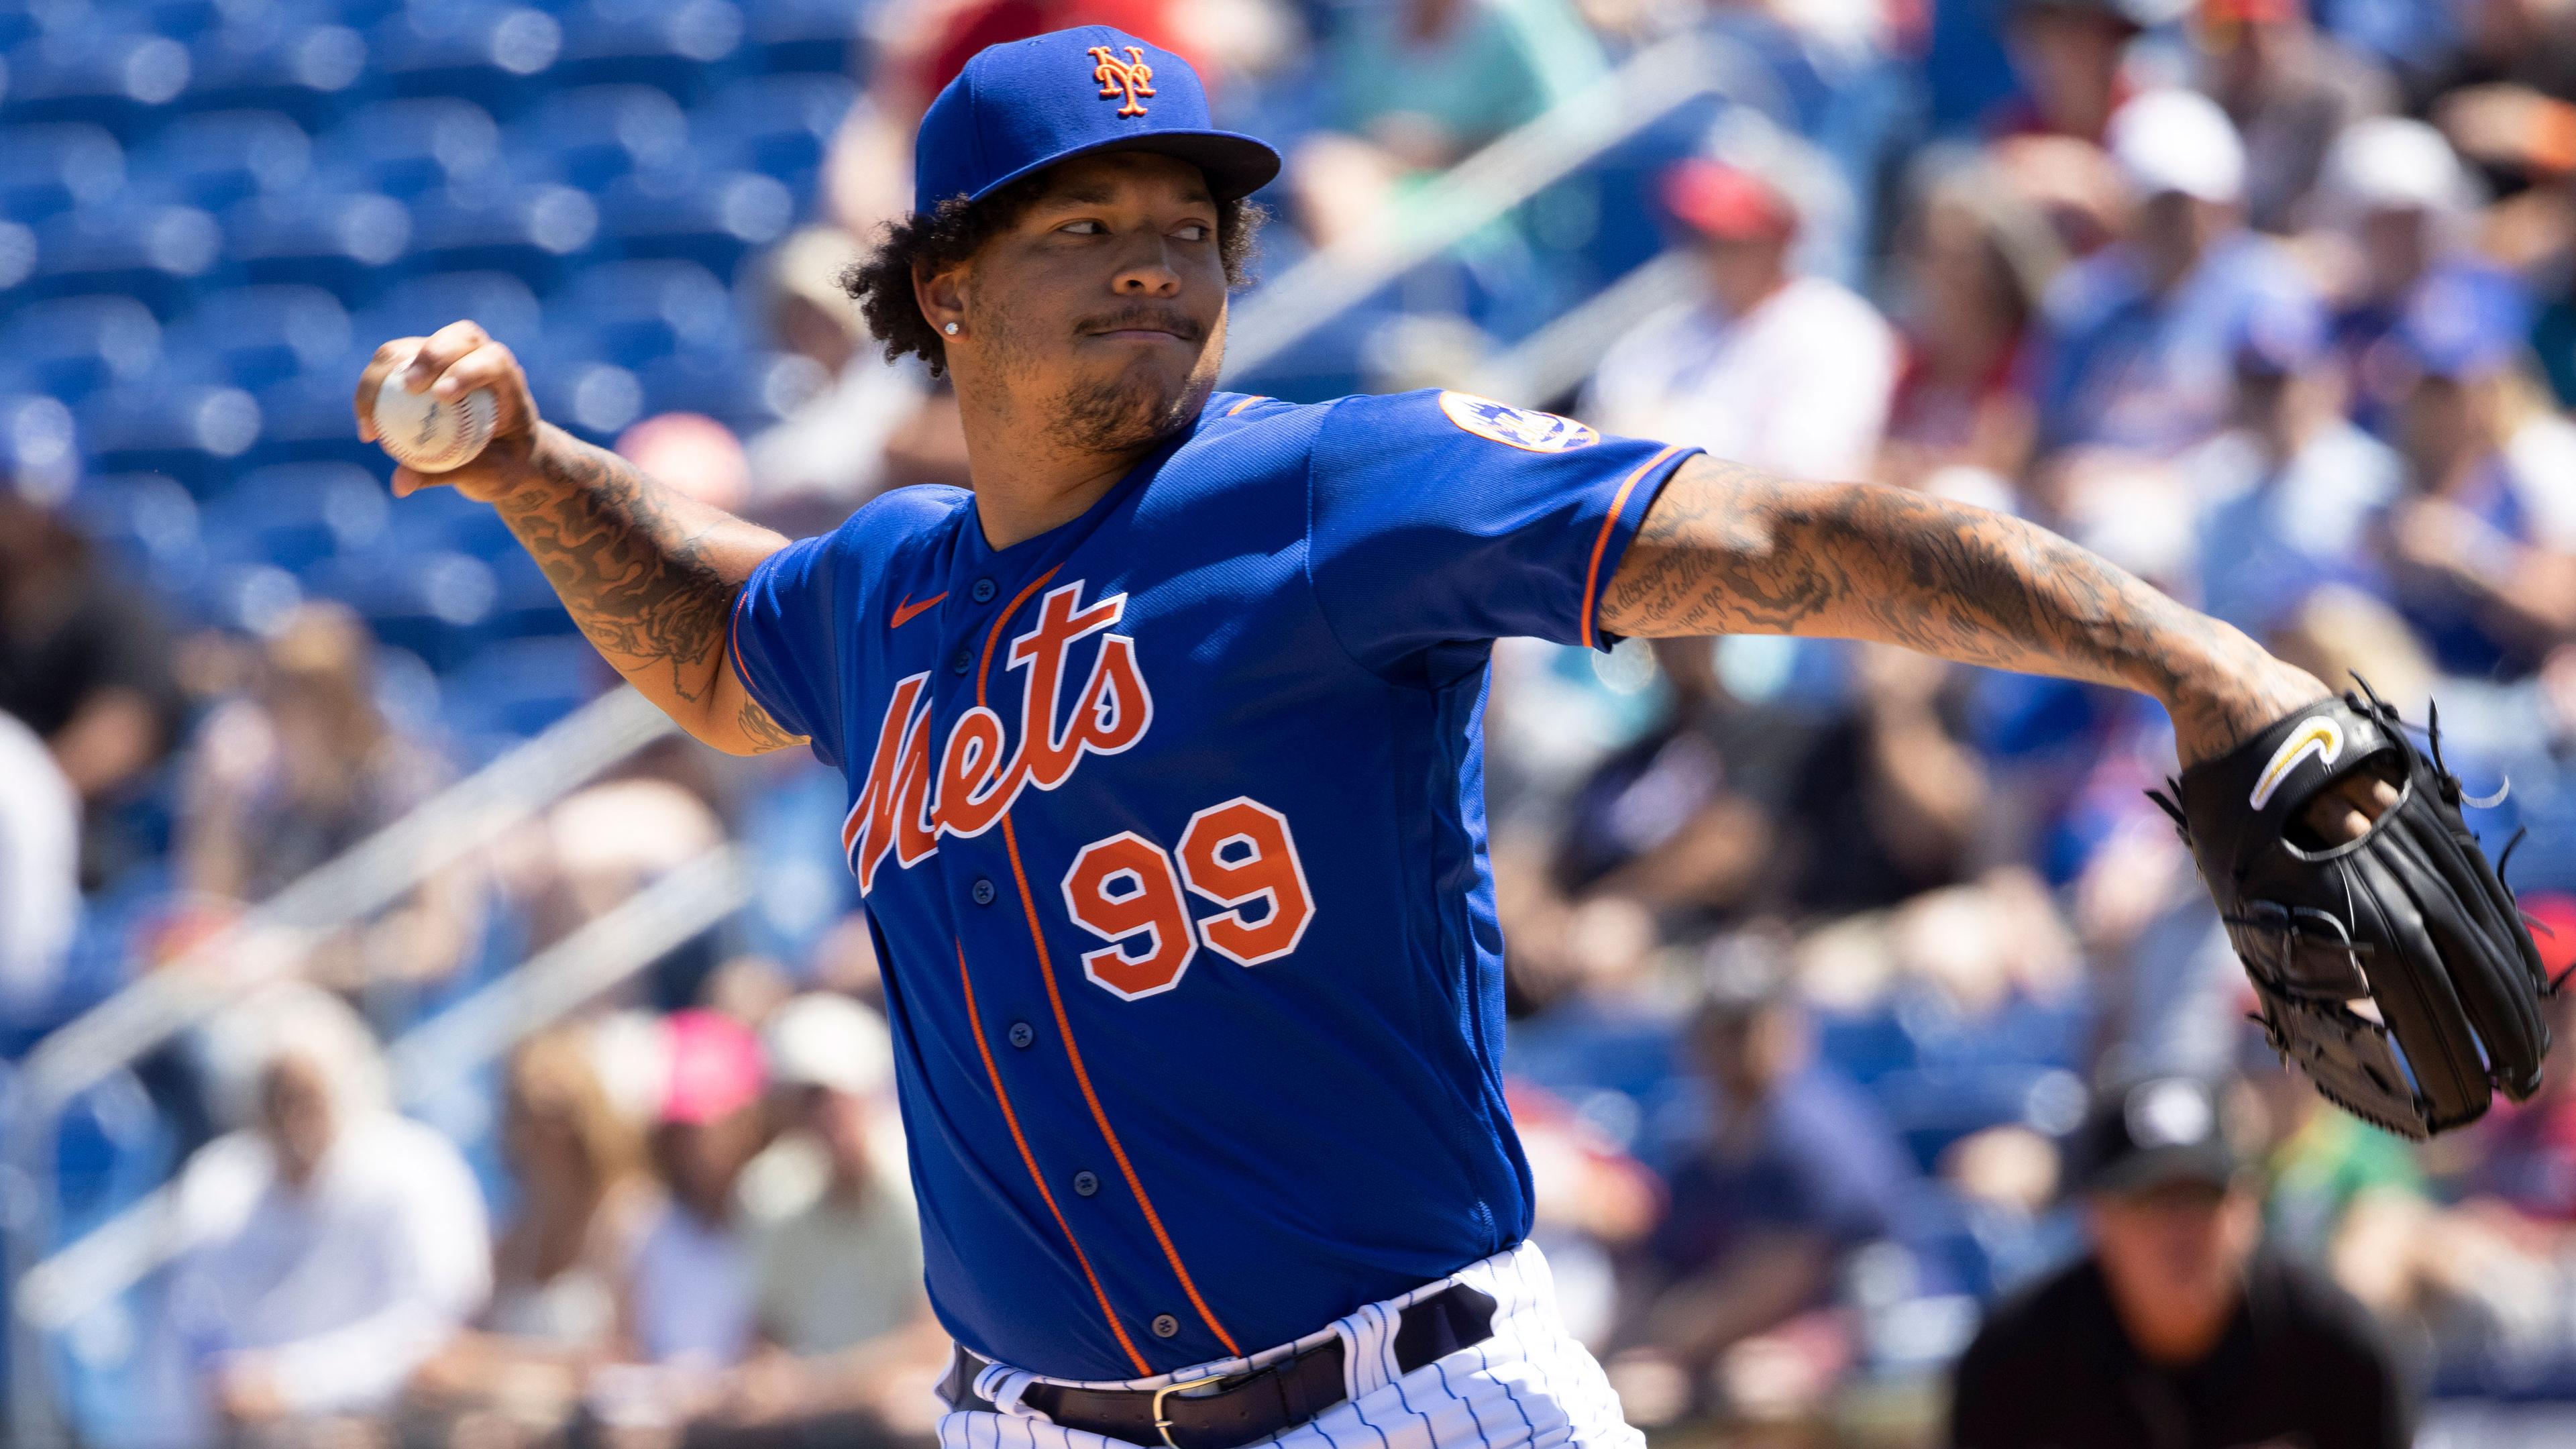 Mar 26, 2022; Port St. Lucie, Florida, USA; New York Mets starting pitcher Taijuan Walker (99) throws a pitch during the first inning against the Washington Nationals at Clover Park. / Reinhold Matay-USA TODAY Sports